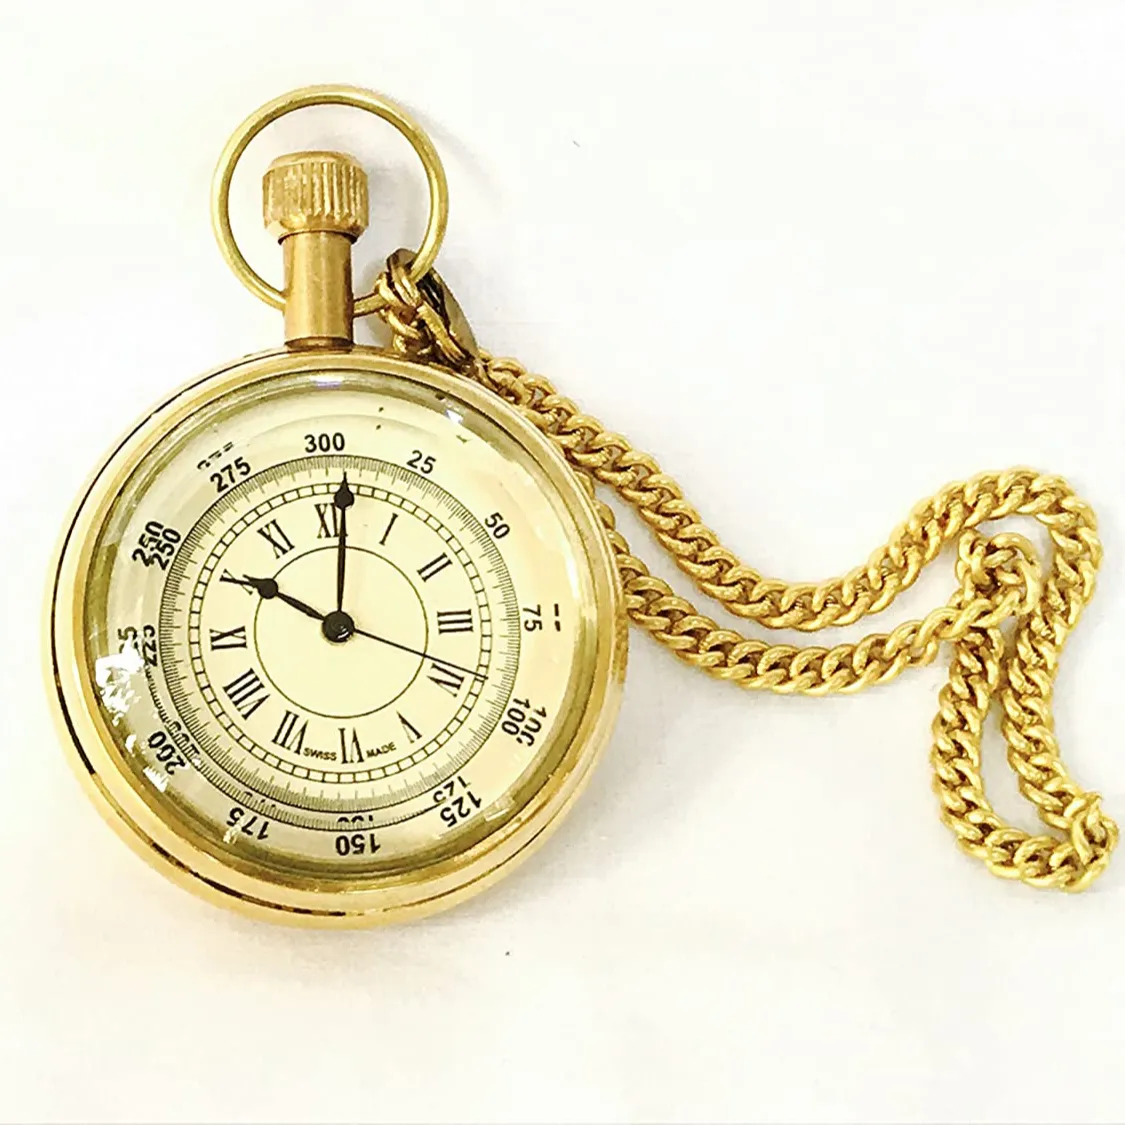 Good Quality Emporium Brass Vintage Pocket Watch with Roman Numerals for Men and Women Available At Reasonable Prices